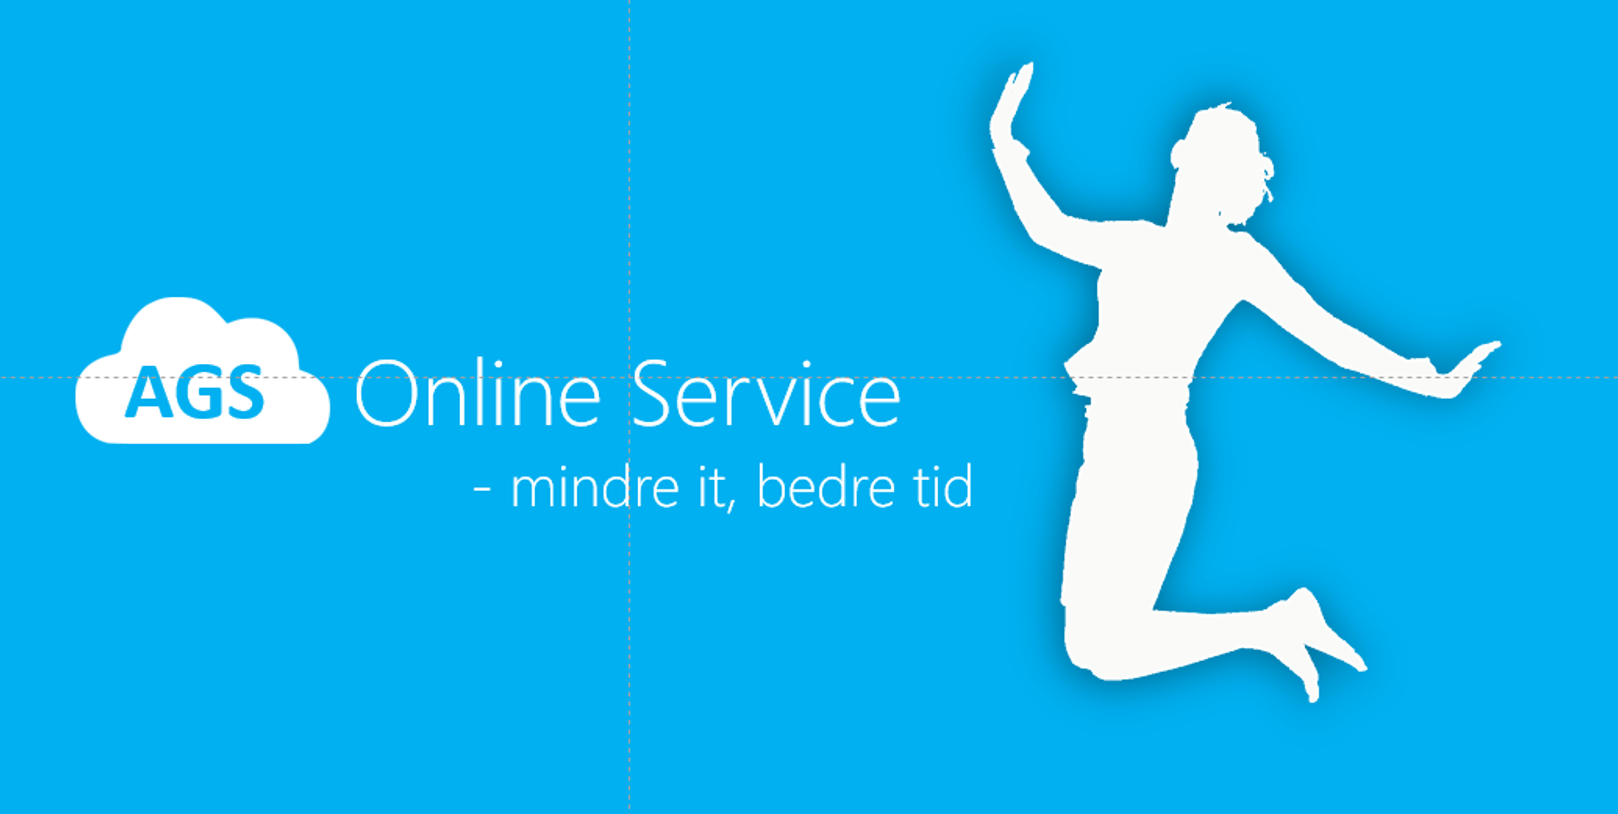 ags-online-service